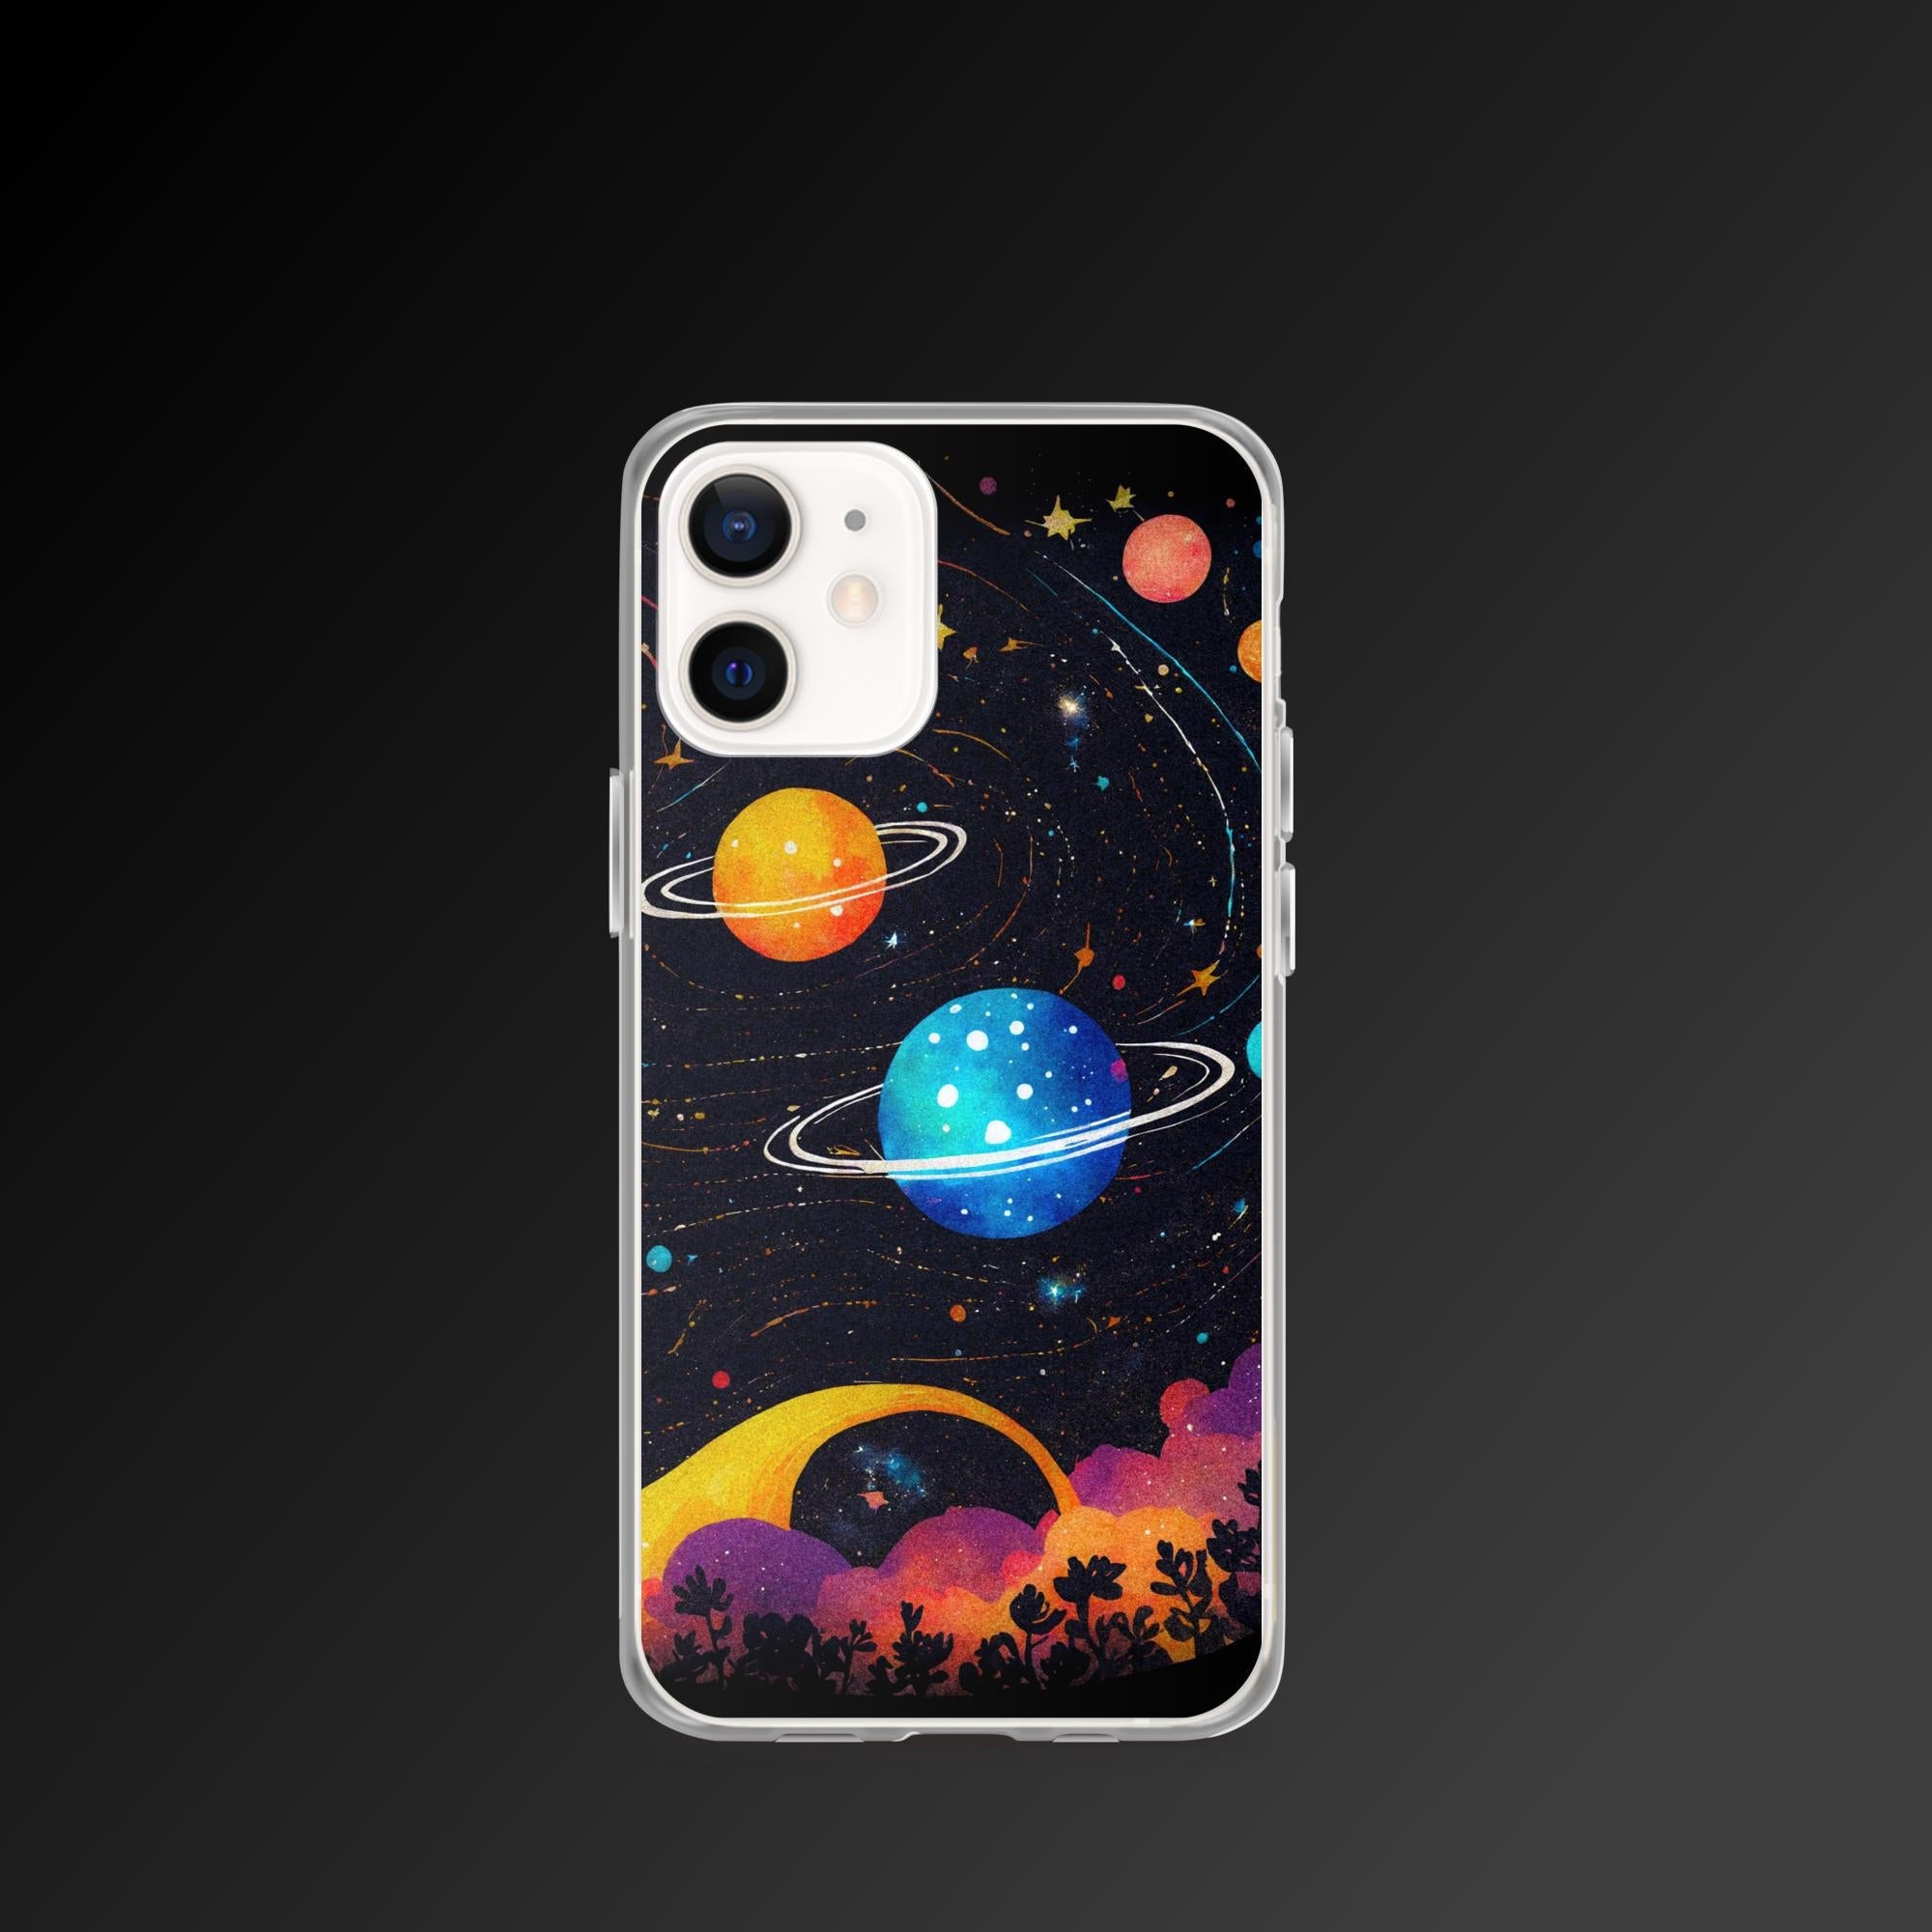 "Clear night" clear iphone case - Clear iphone case - Ever colorful